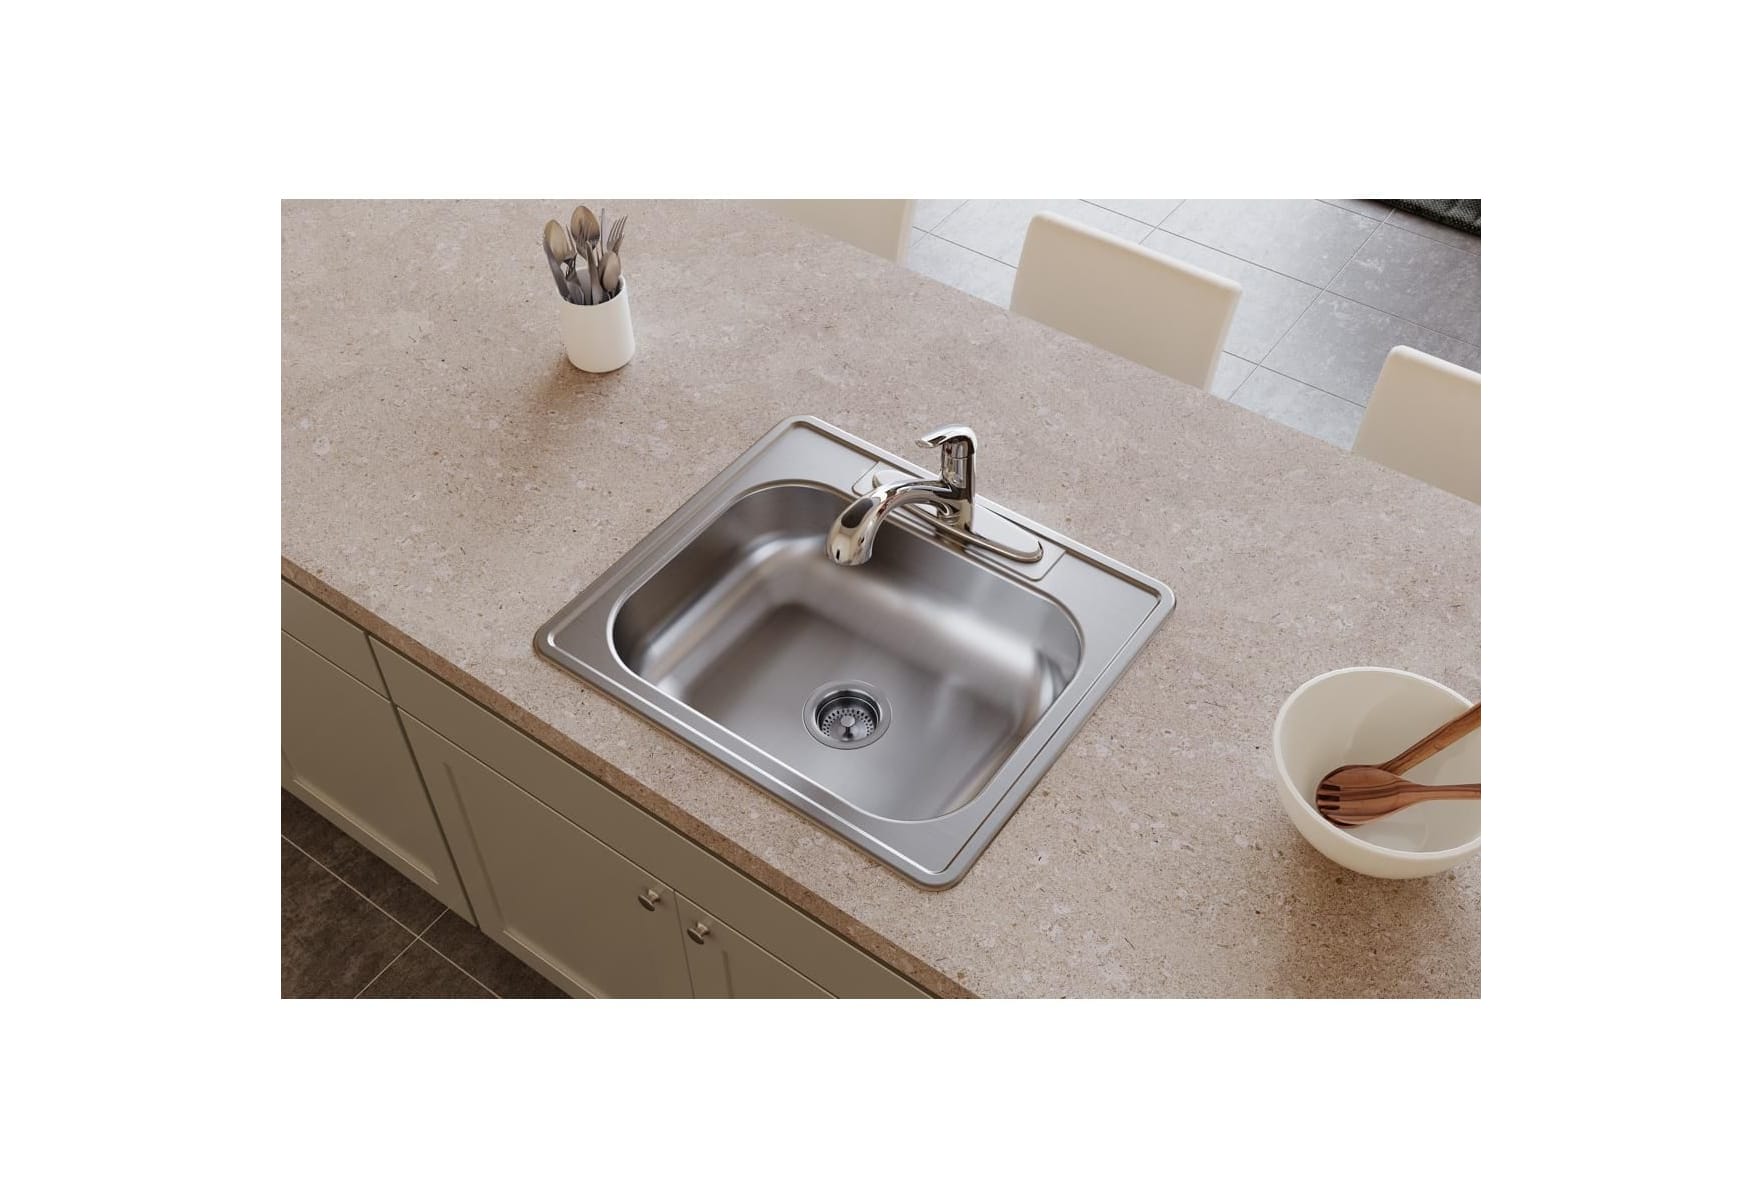 MK-042/3AEG3*A 25 In ELKAY D125223 Drop-In Sink with Faucet Ledge L 